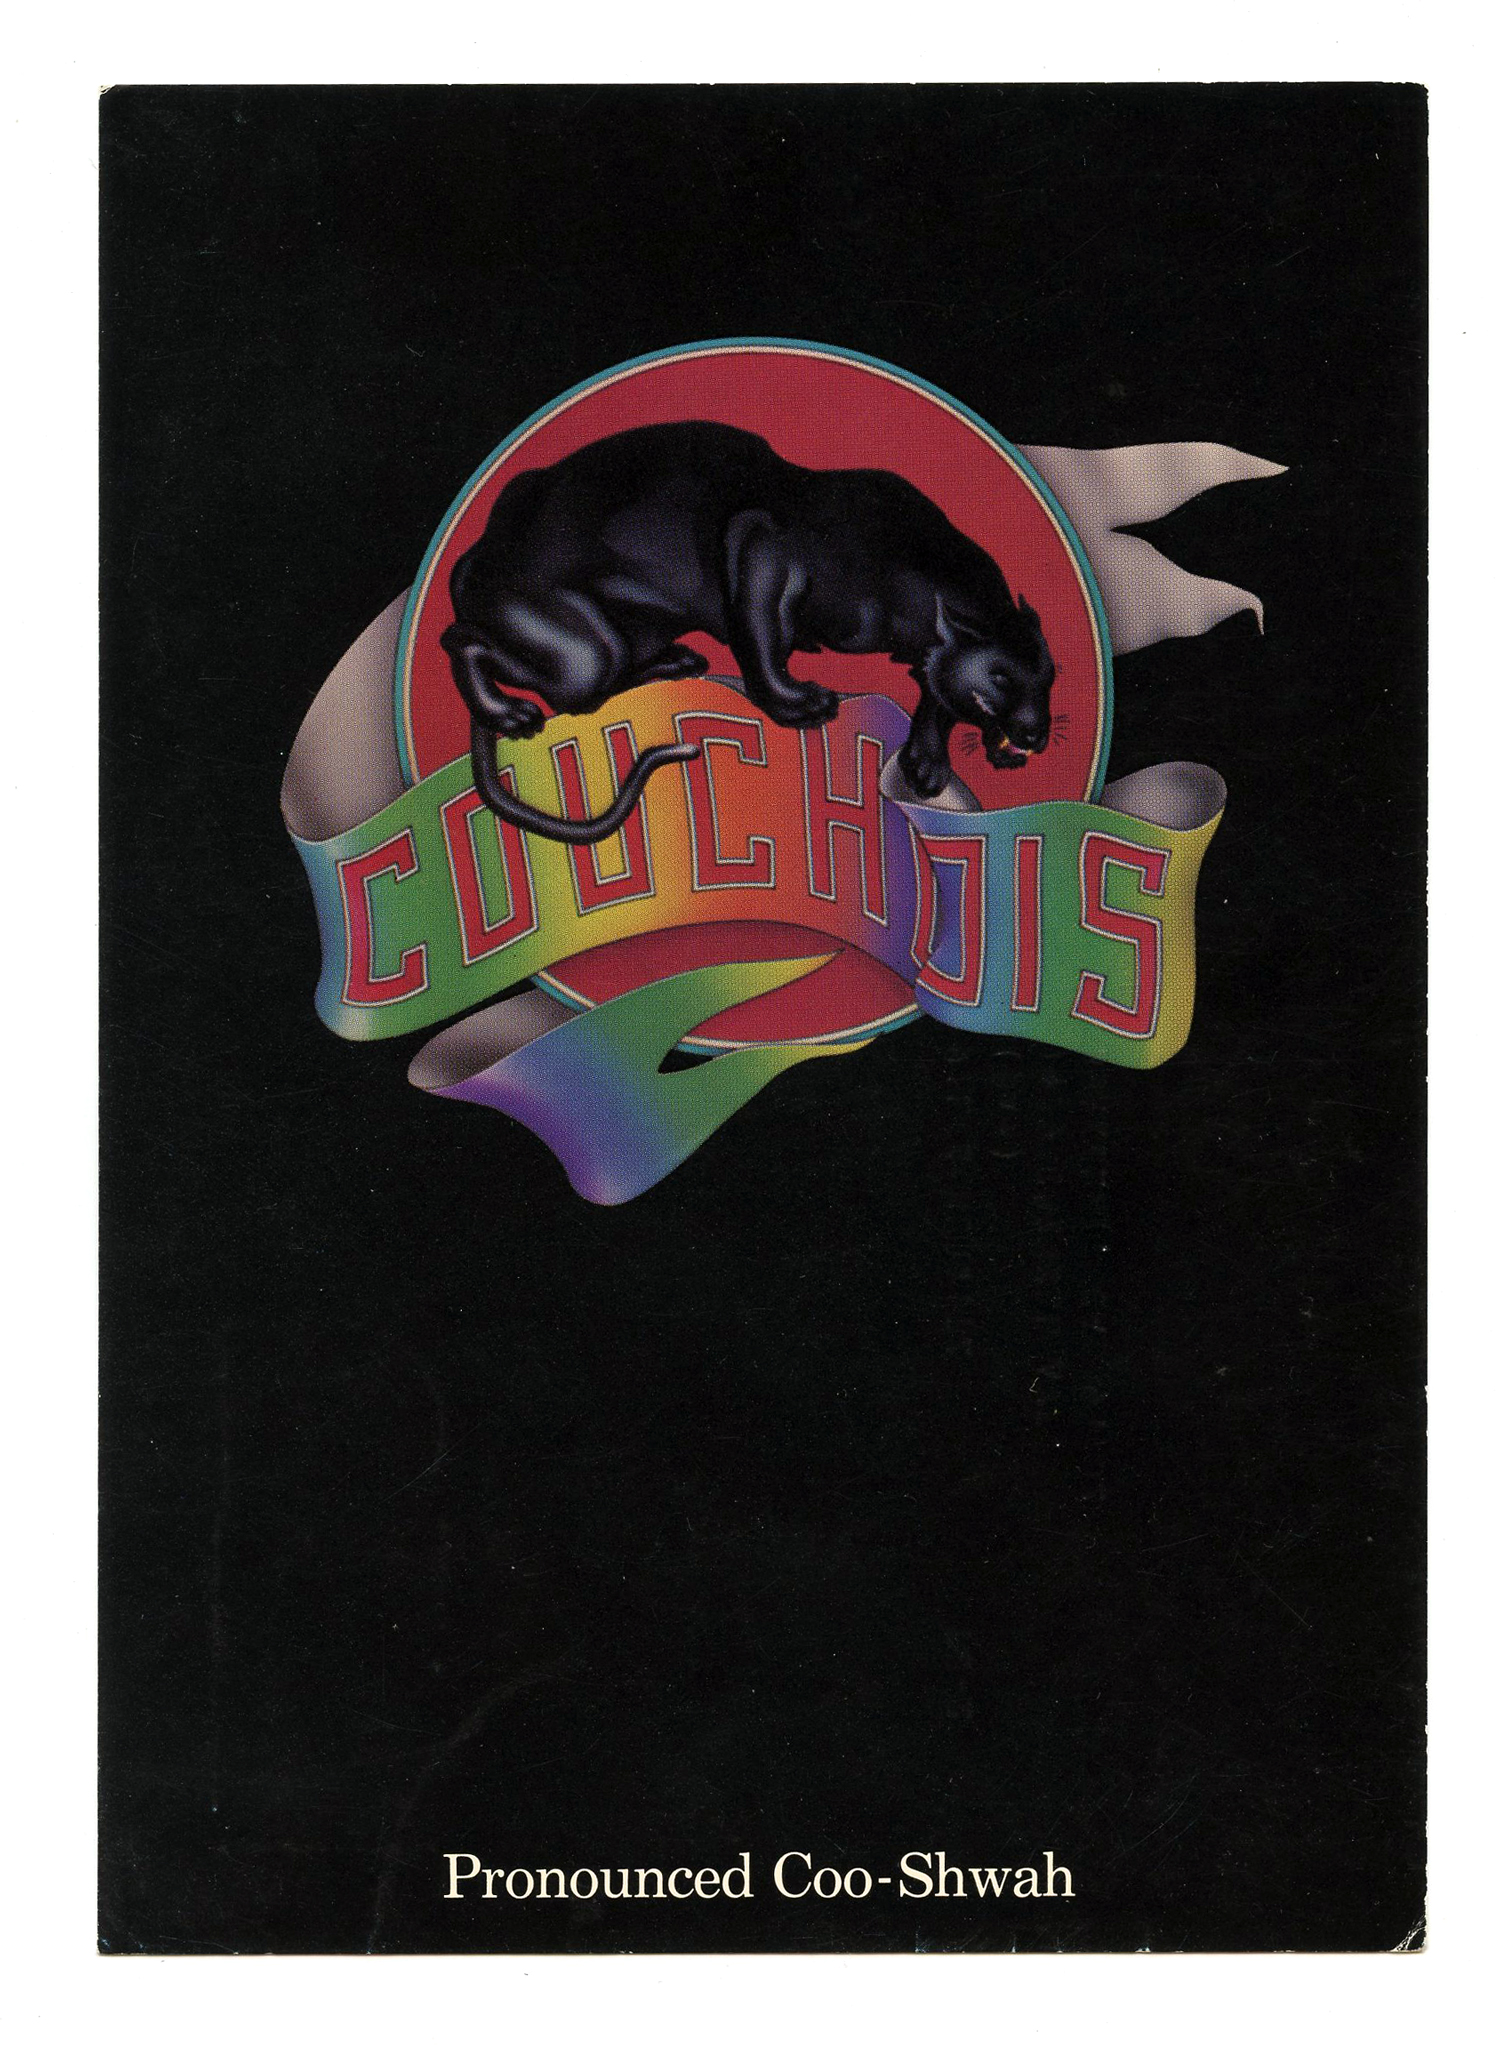 Couchois Postcard 1979 self titled Album Promotion Mailed 